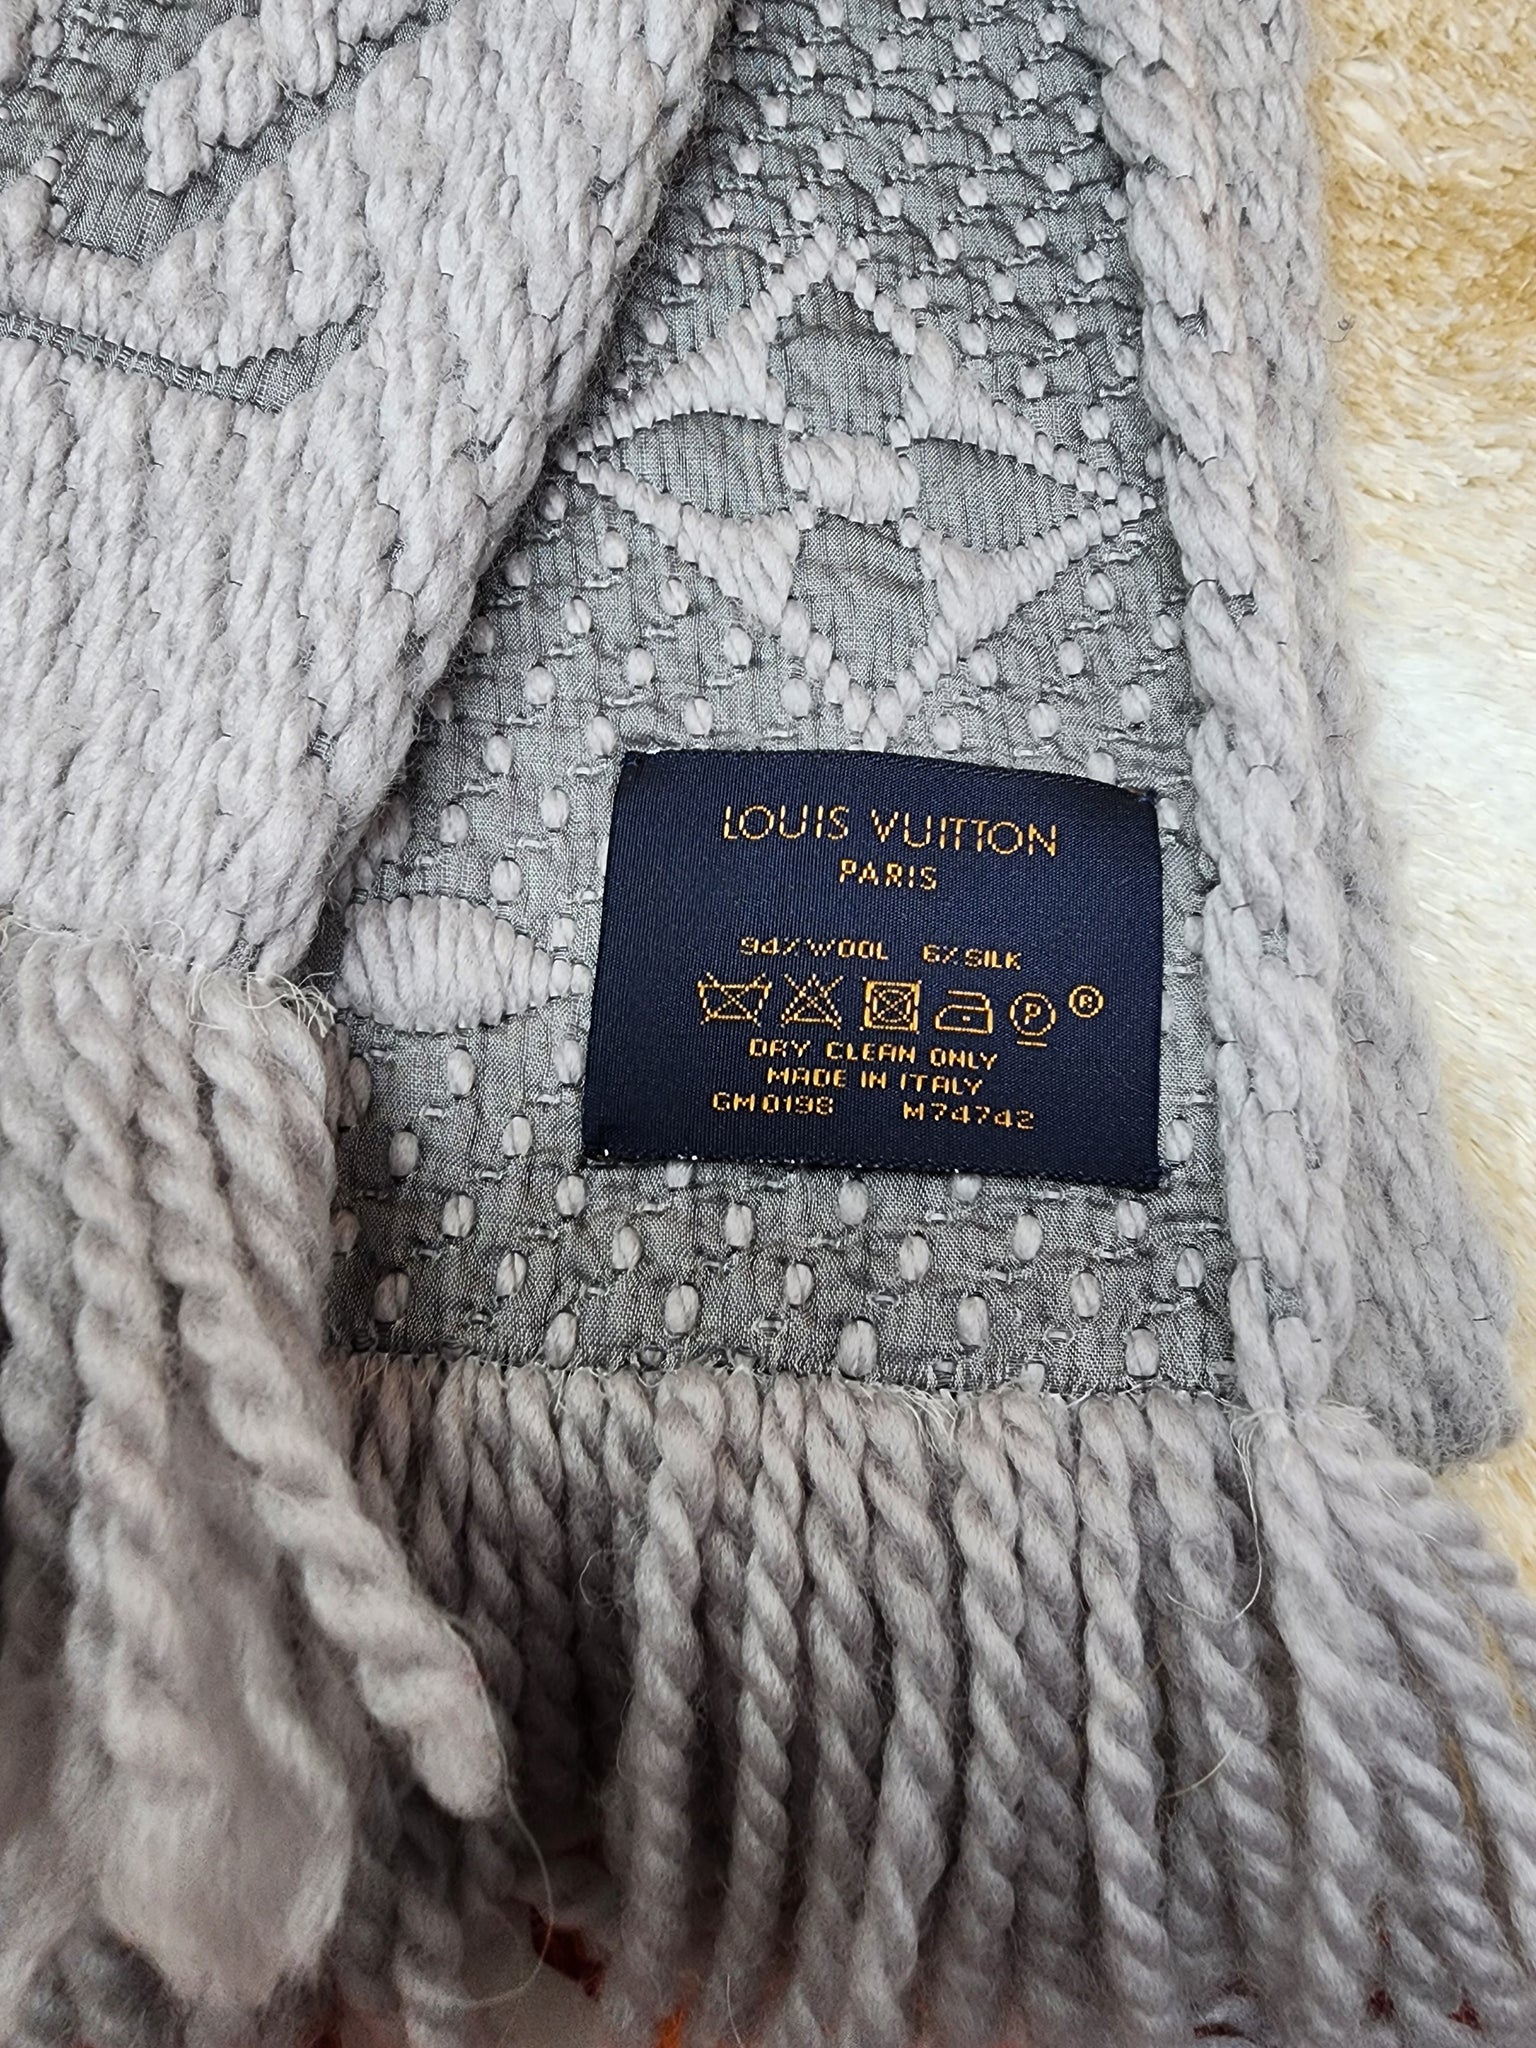 louis vuitton with scarf